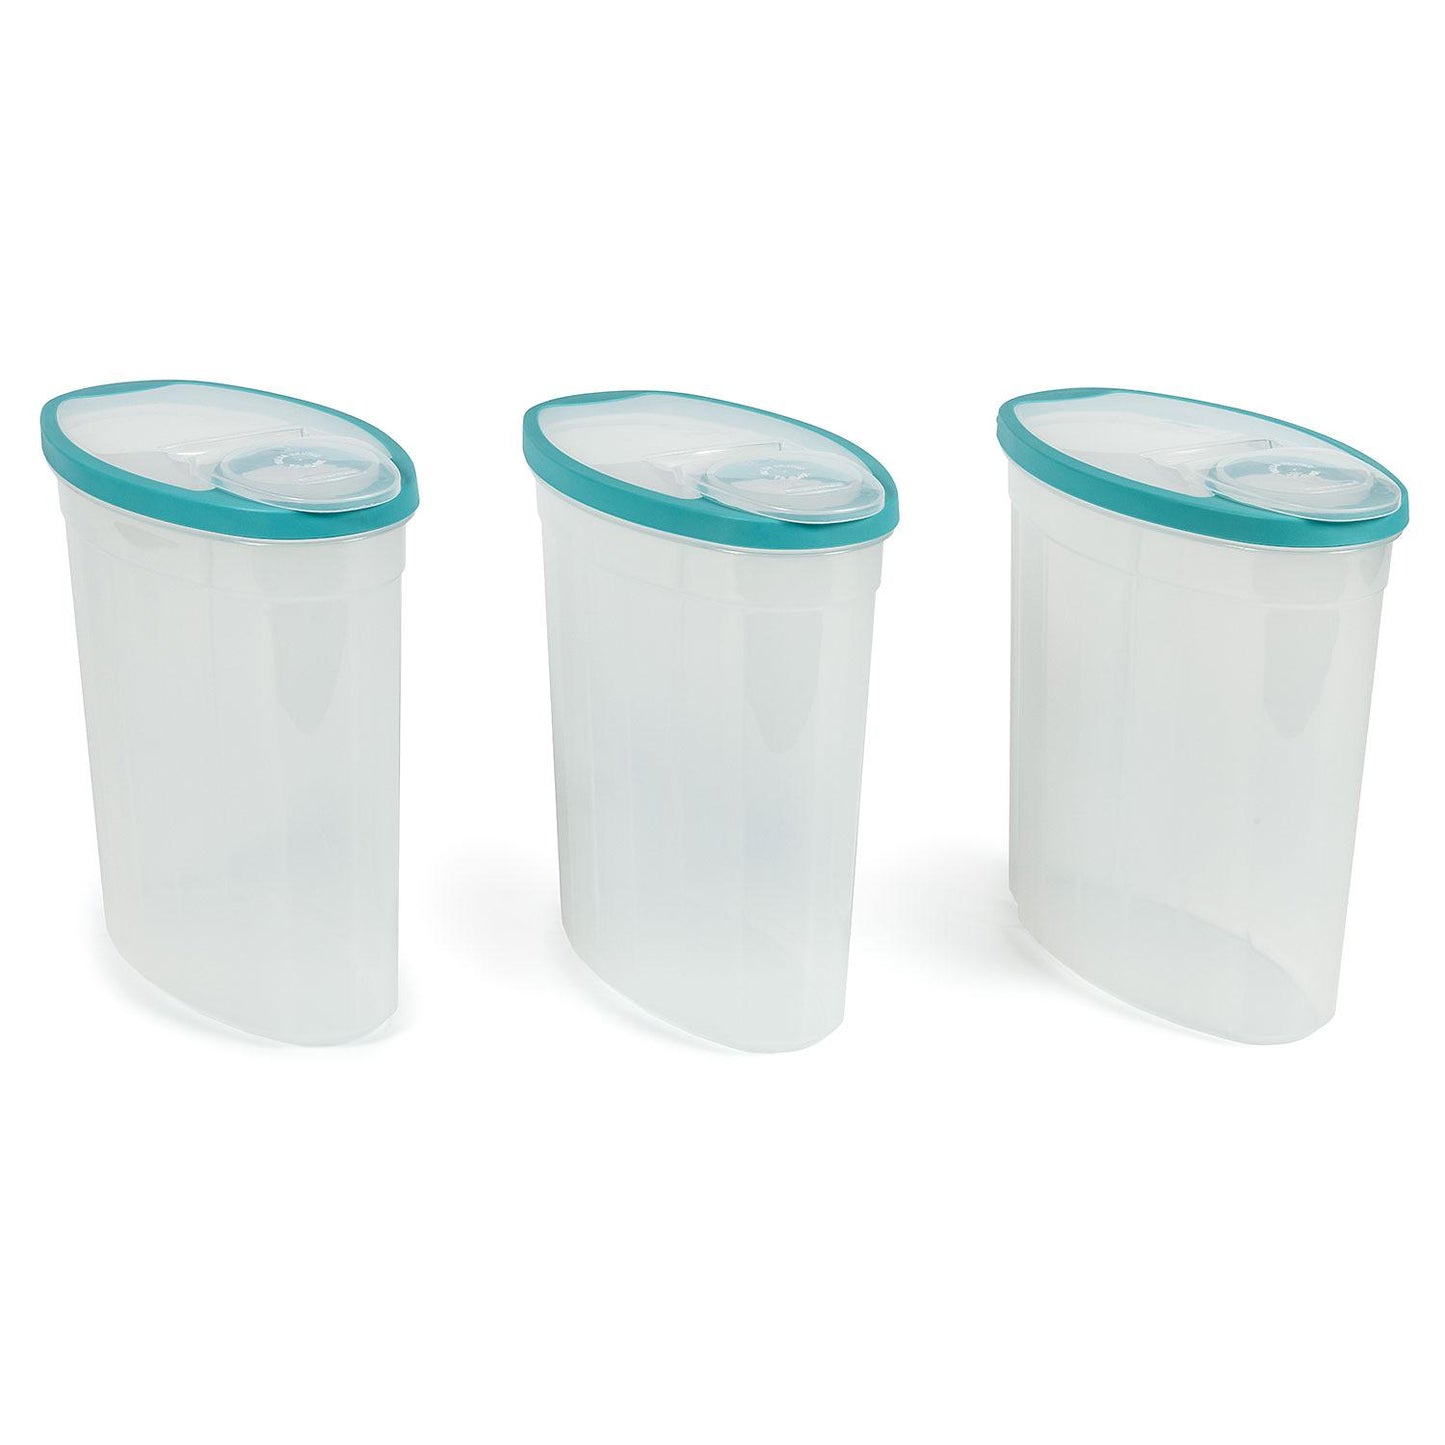 Free 2-day shipping. Buy Rubbermaid Cereal Keepers (3 Pack) - Assorted  Colors at Walmart.com